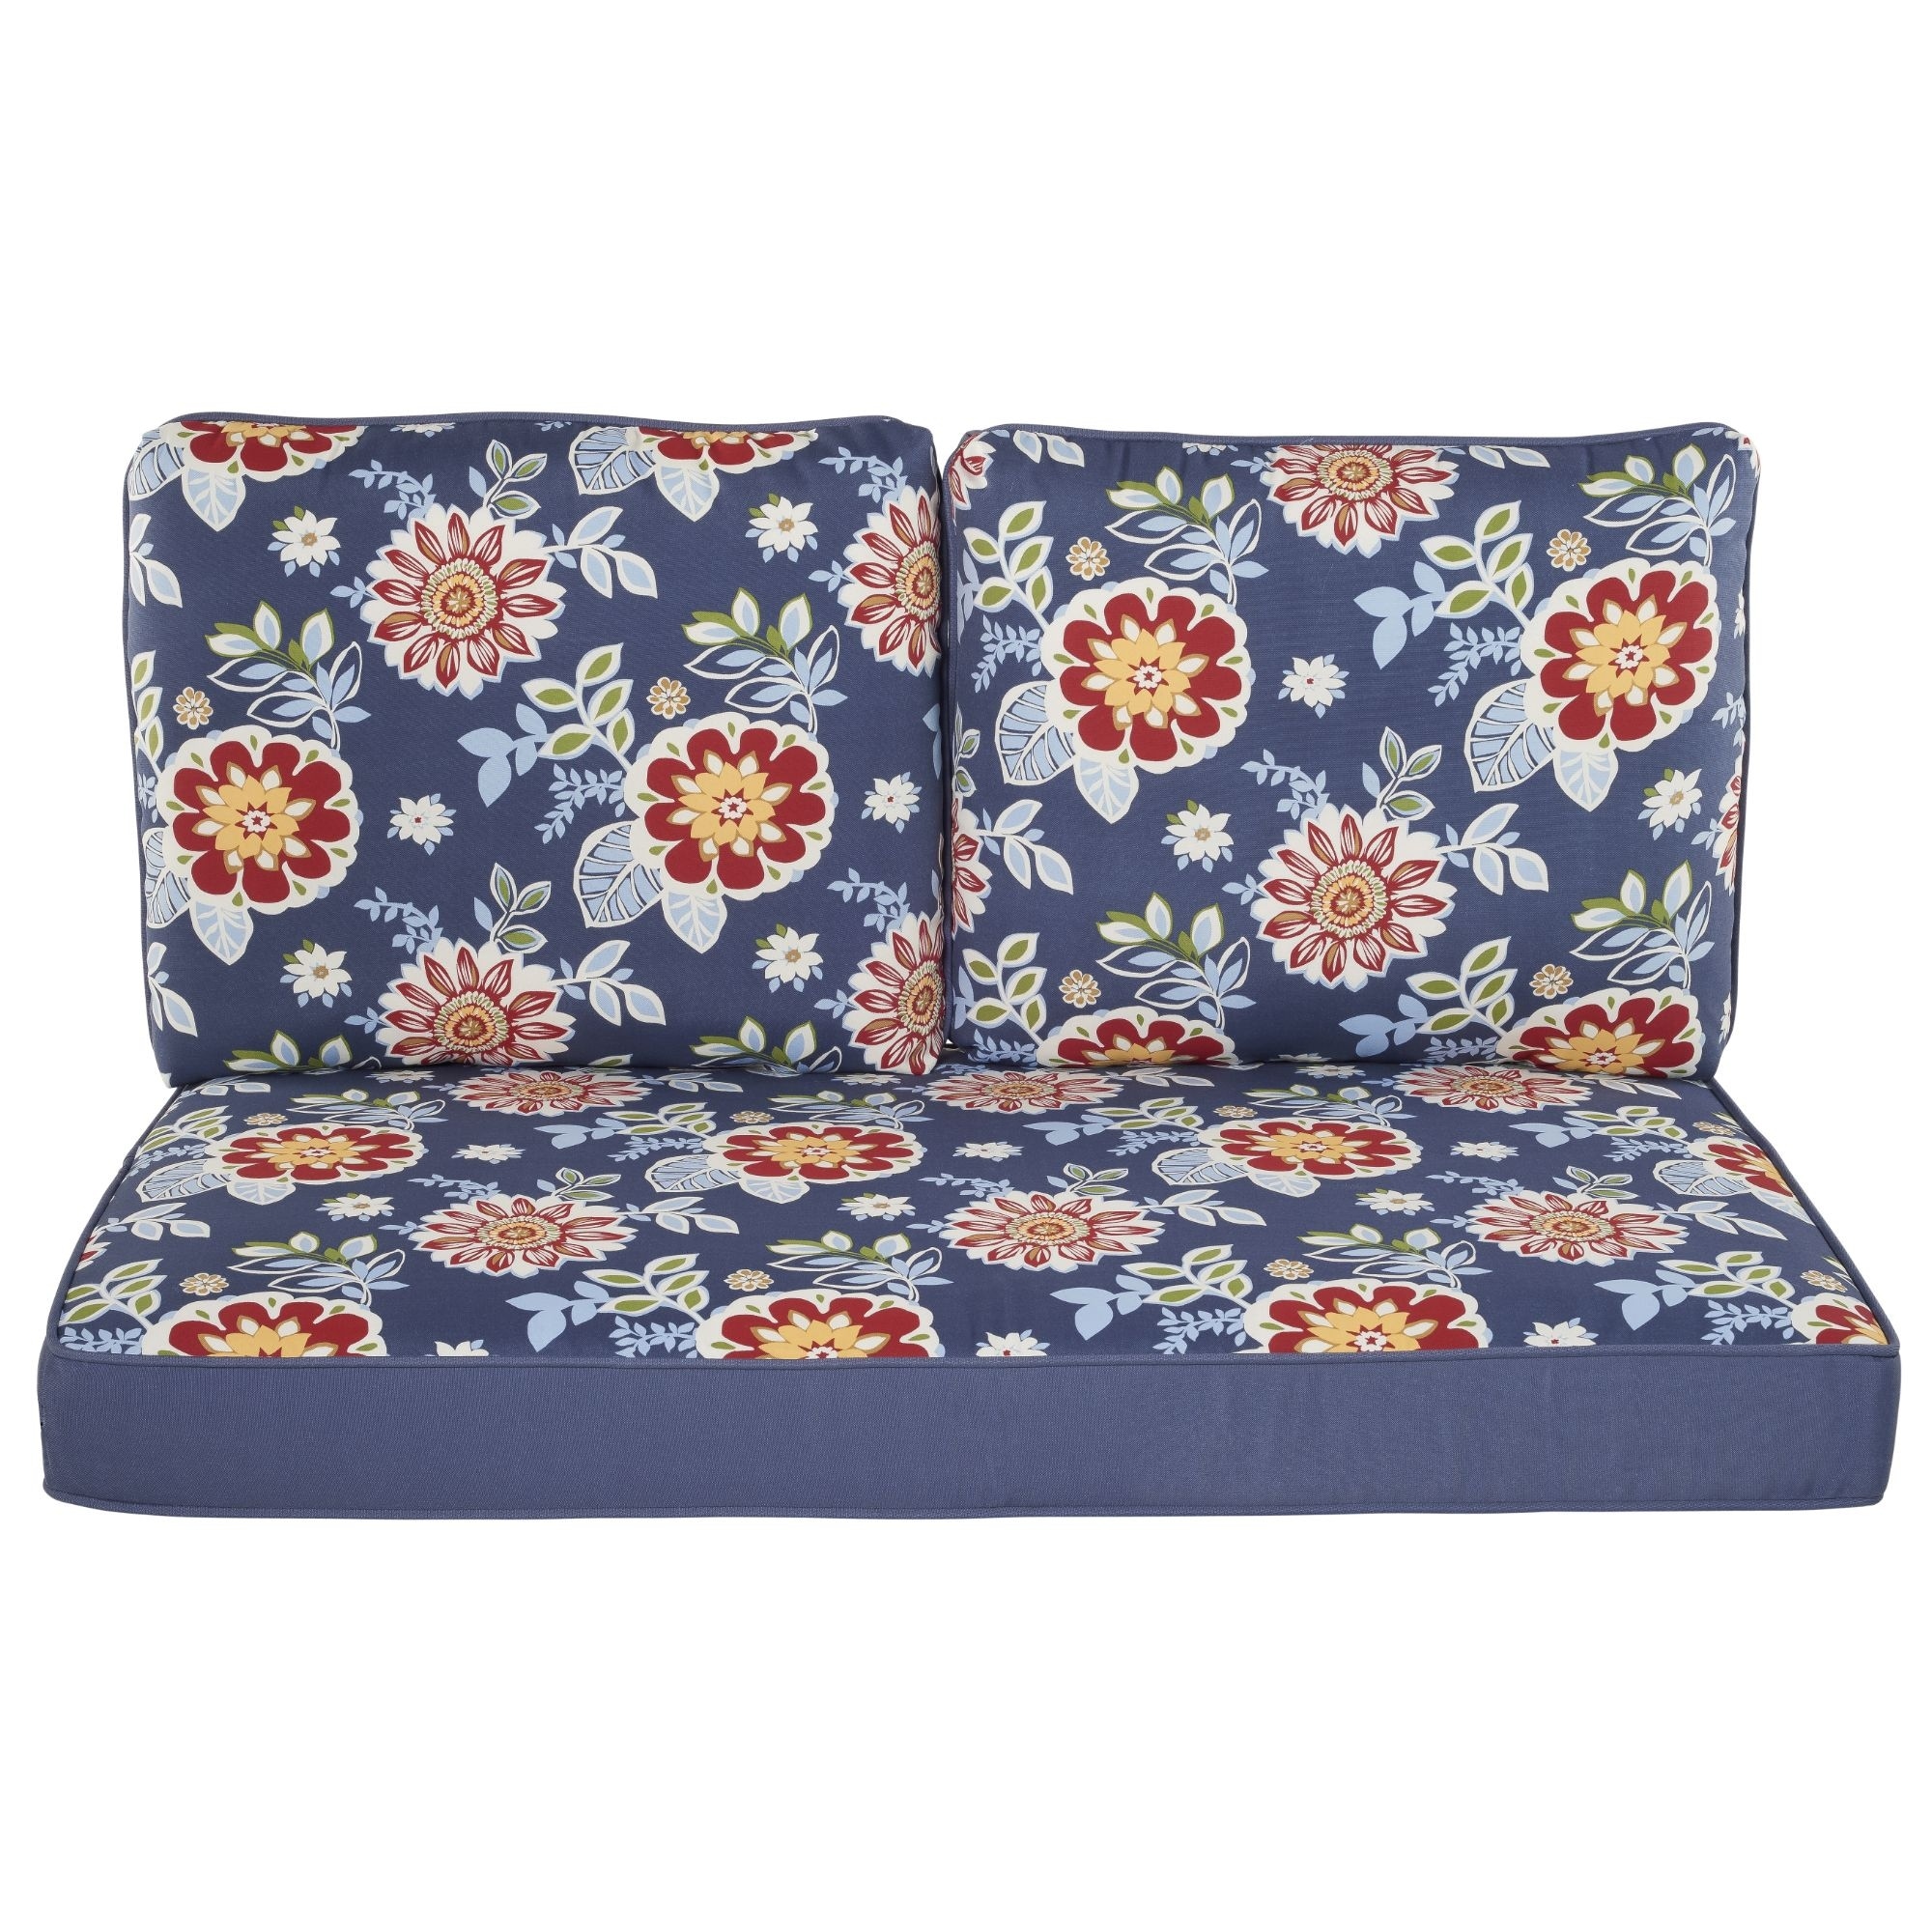 https://ak1.ostkcdn.com/images/products/is/images/direct/7b72ced9efac88772d9fbdc6e596d0d00ede4948/Haven-Way-Floral-Loveseat-Cushion-Set.jpg